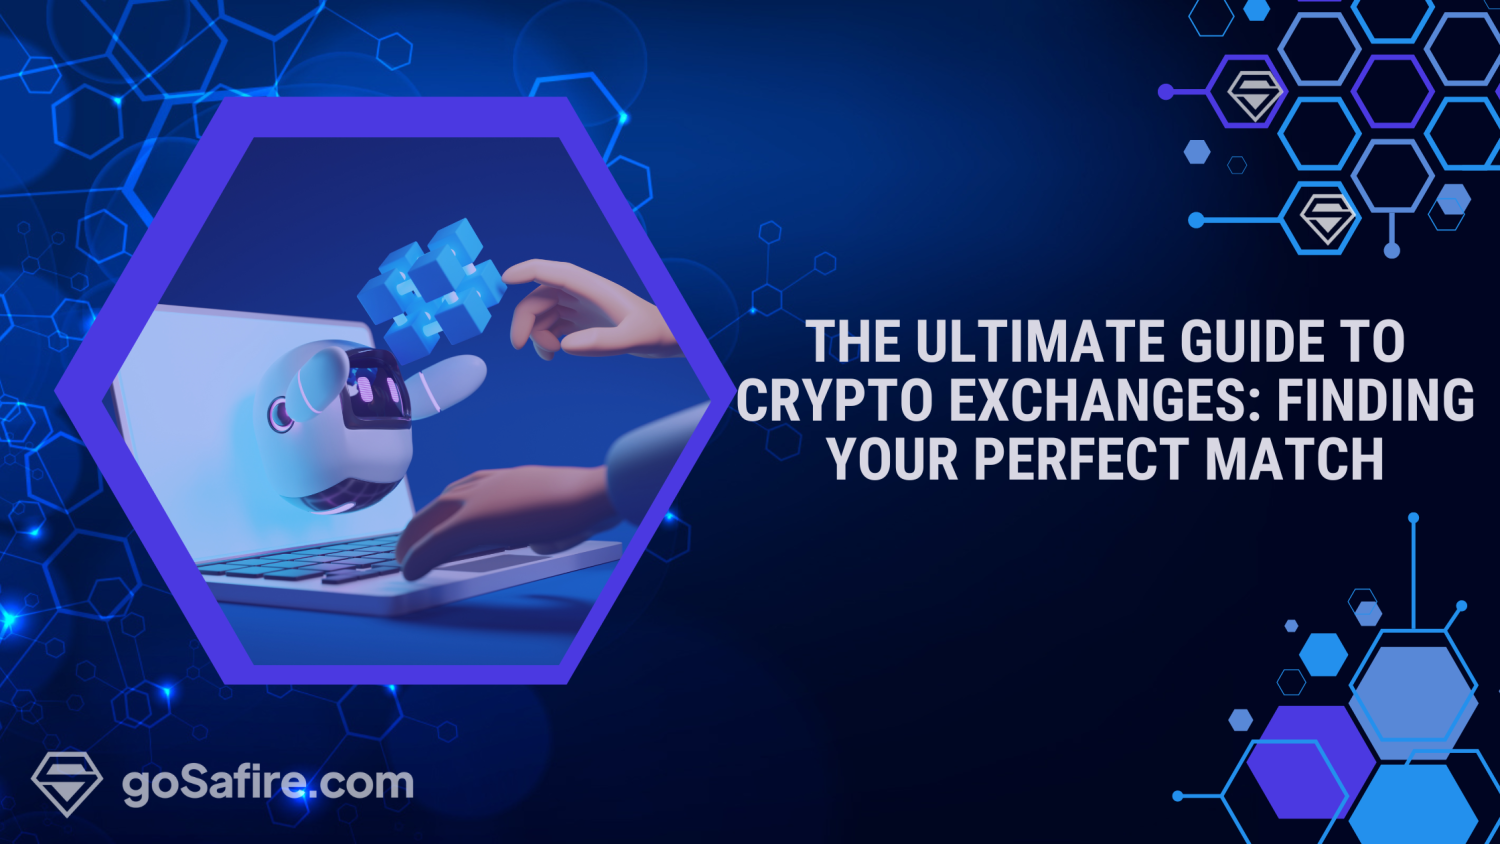 The Ultimate Guide to Crypto Exchanges: Finding Your Perfect Match